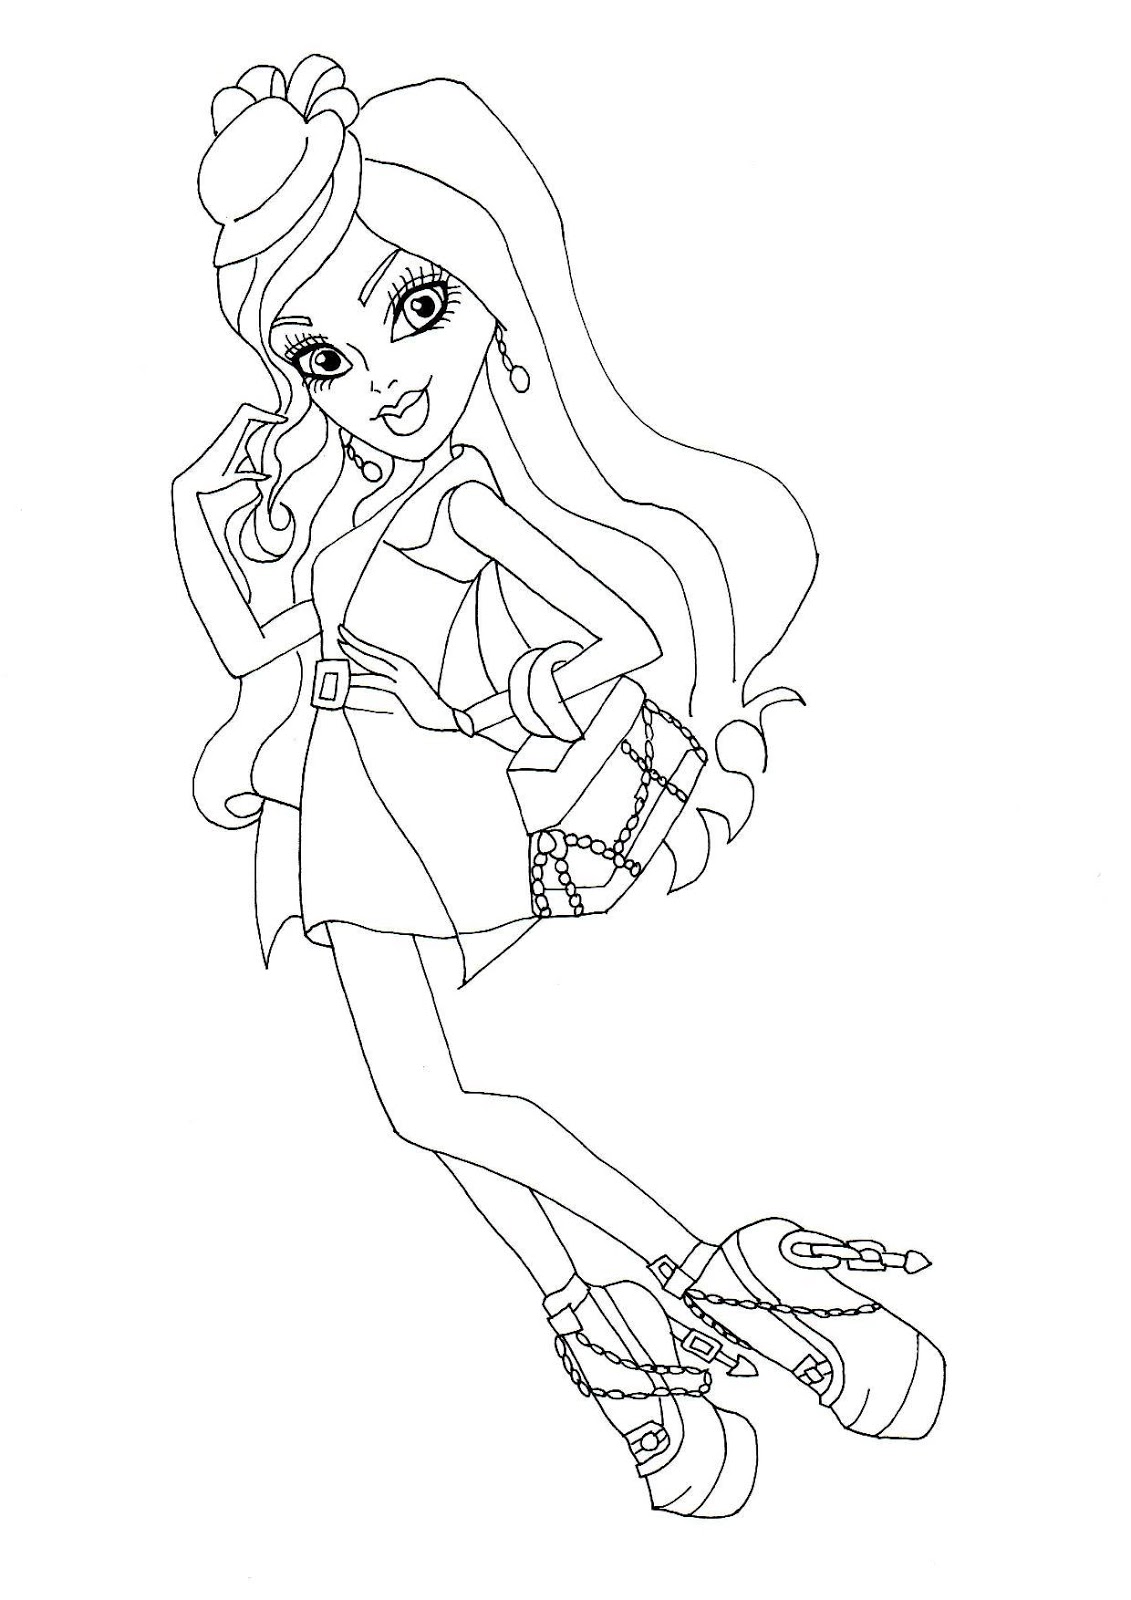 Download Free Printable Monster High Coloring Pages: Spectra Ghouls Night Out Coloring Sheet